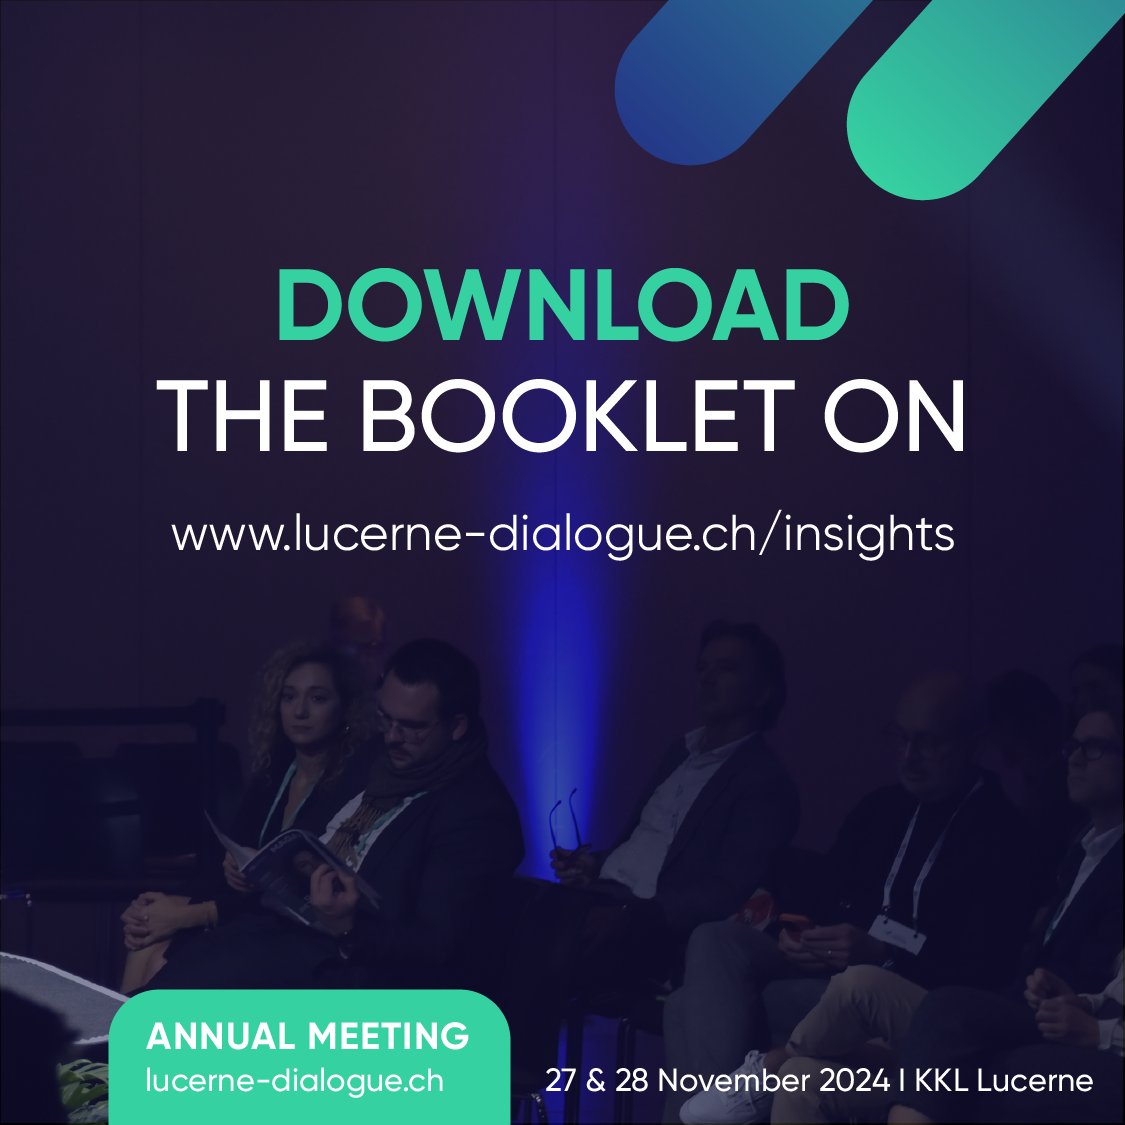 At the last #AnnualMeeting, all participants received our #DialogueGuide. 

Today, we're sharing it with all of you - consider it our contribution to your next meaningful dialogue. 
👉🏼 Download it here: tinyurl.com/2tarw5eh